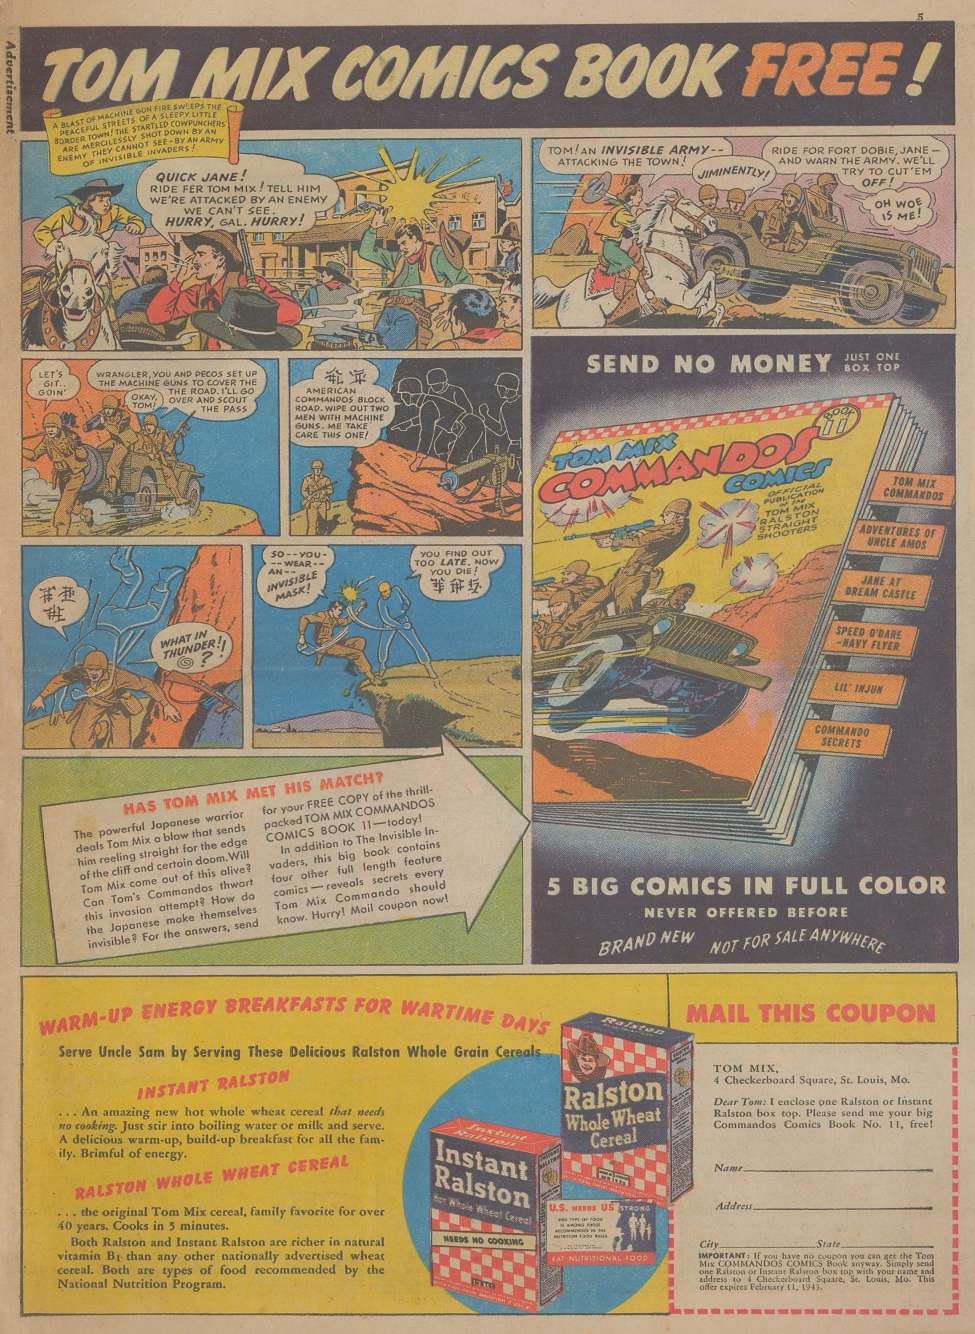 Comic Book Cover For Tom Mix Comics Giveaway Ad Section (1942)